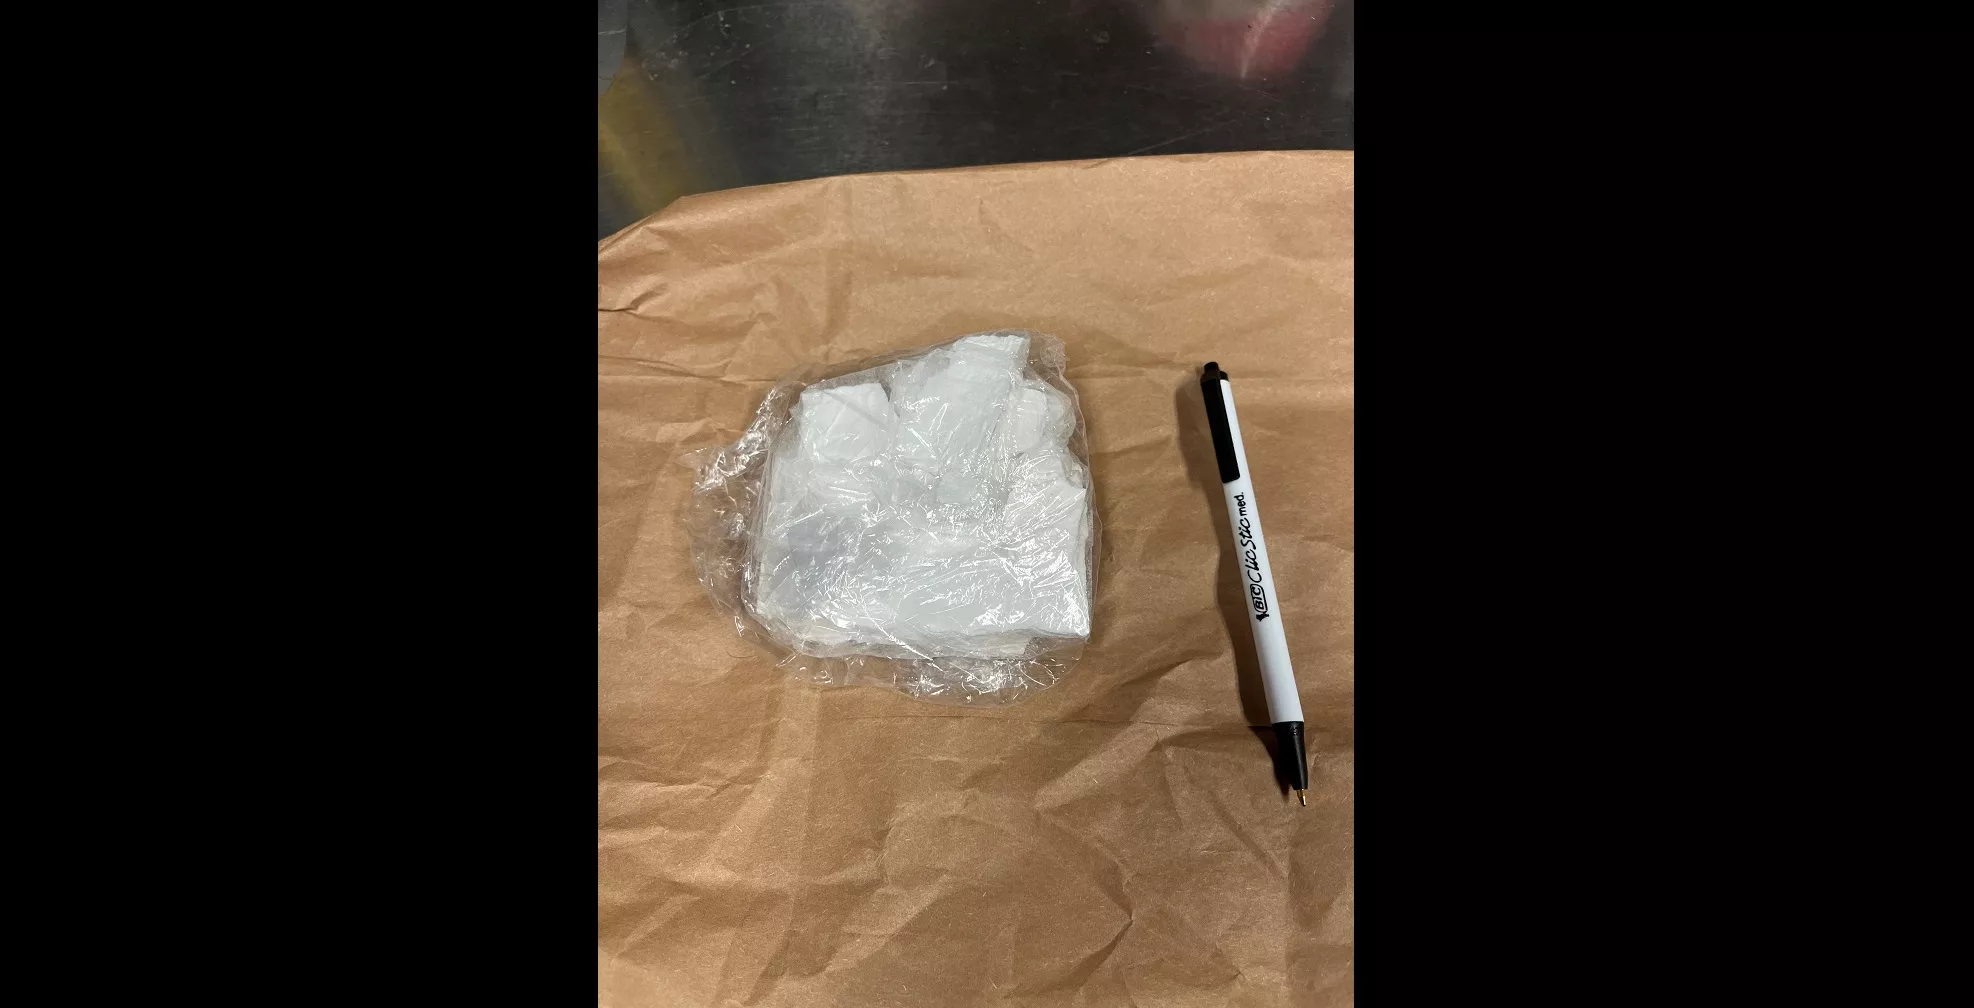 fentanyl-confiscated-from-amy-mellott-santa-rosa-police